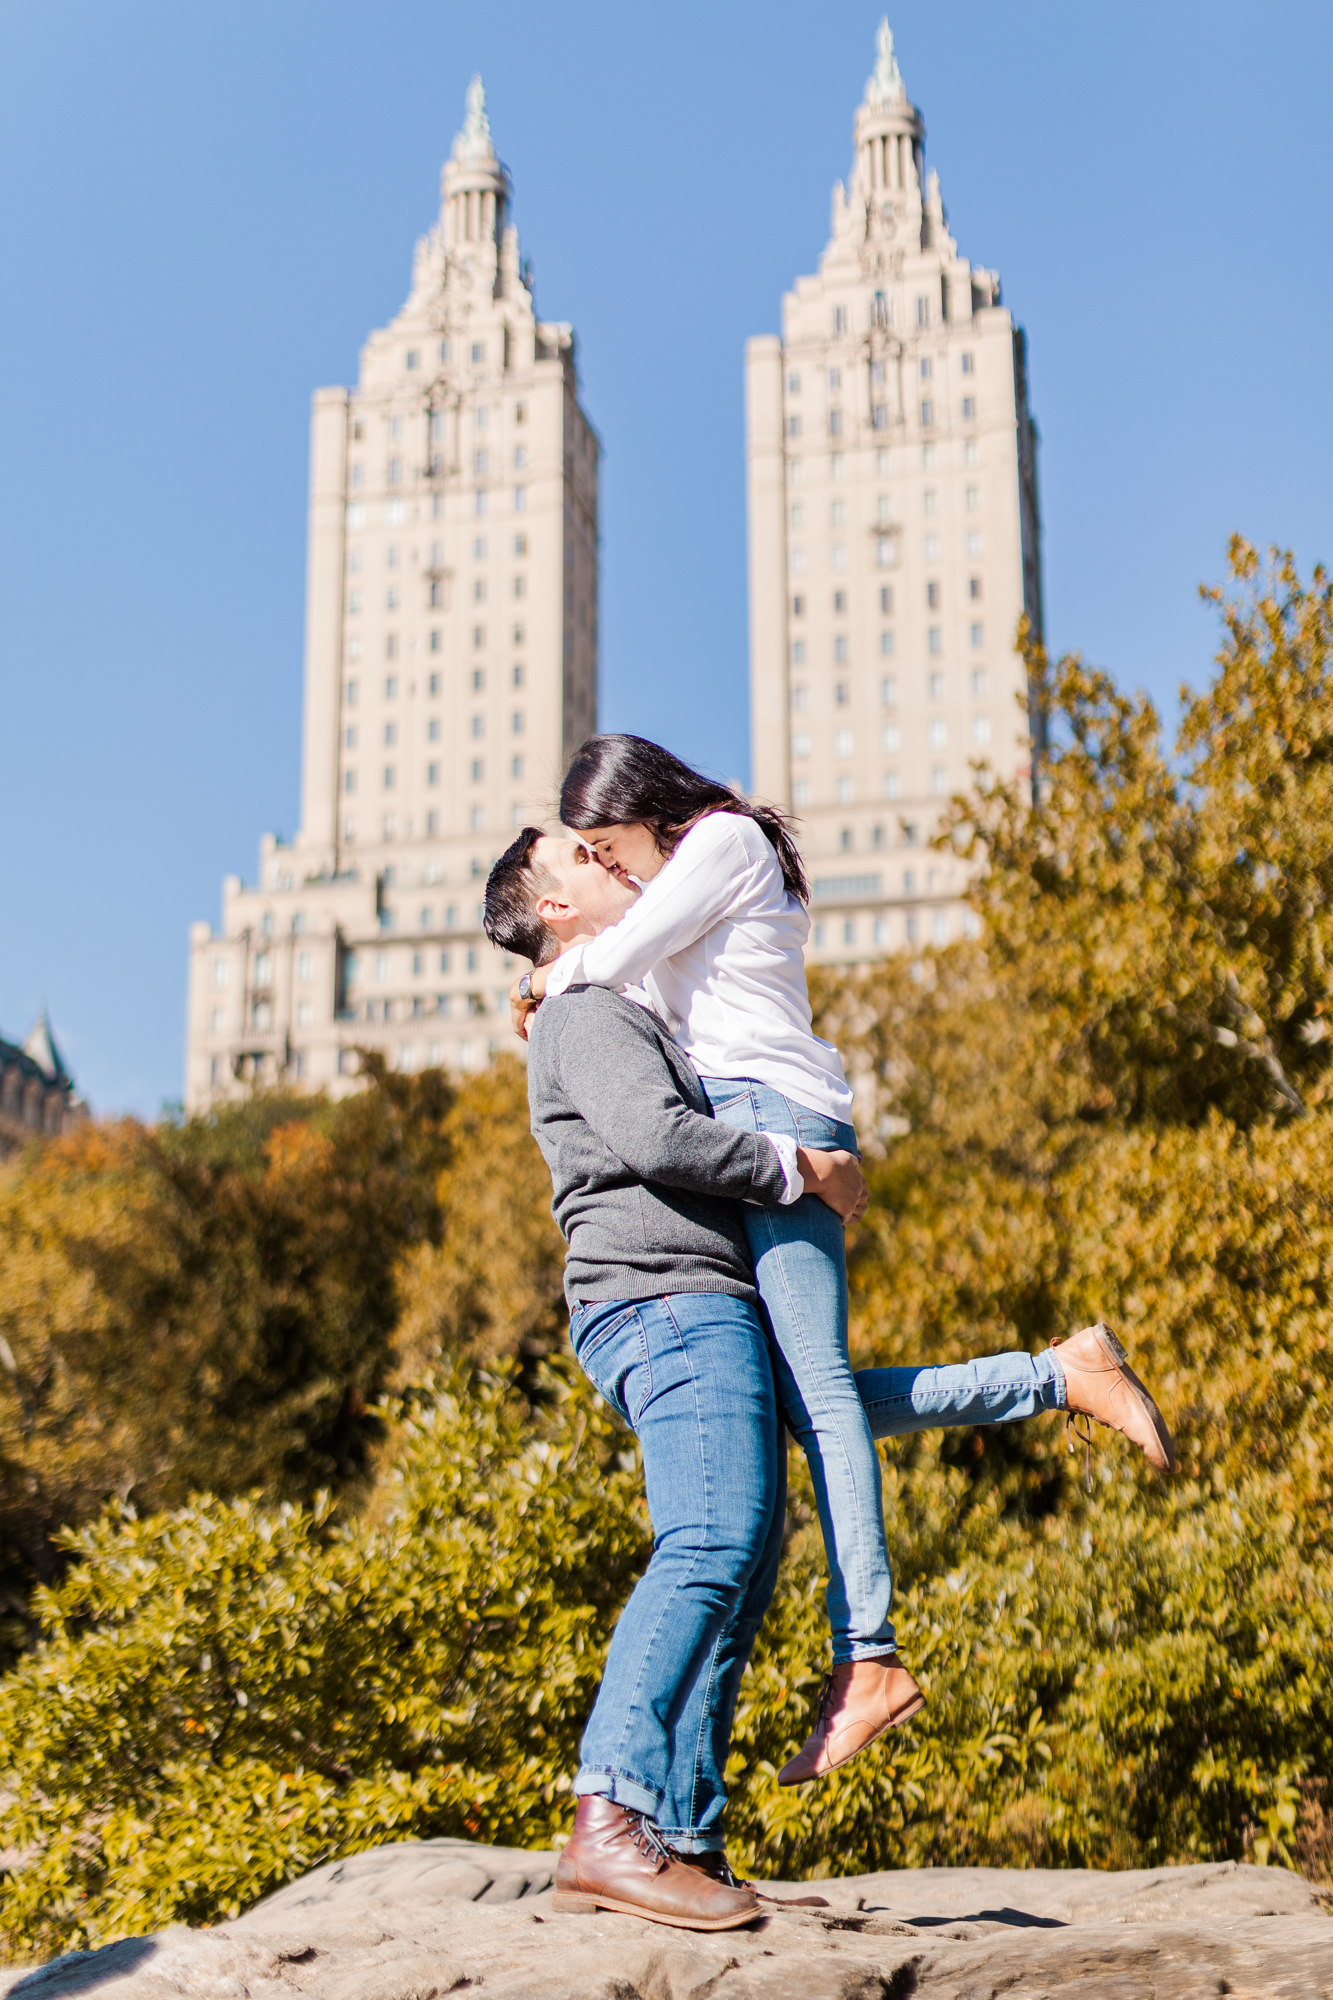 Romantic Upper West Side Engagement Photo Shoot in NYC